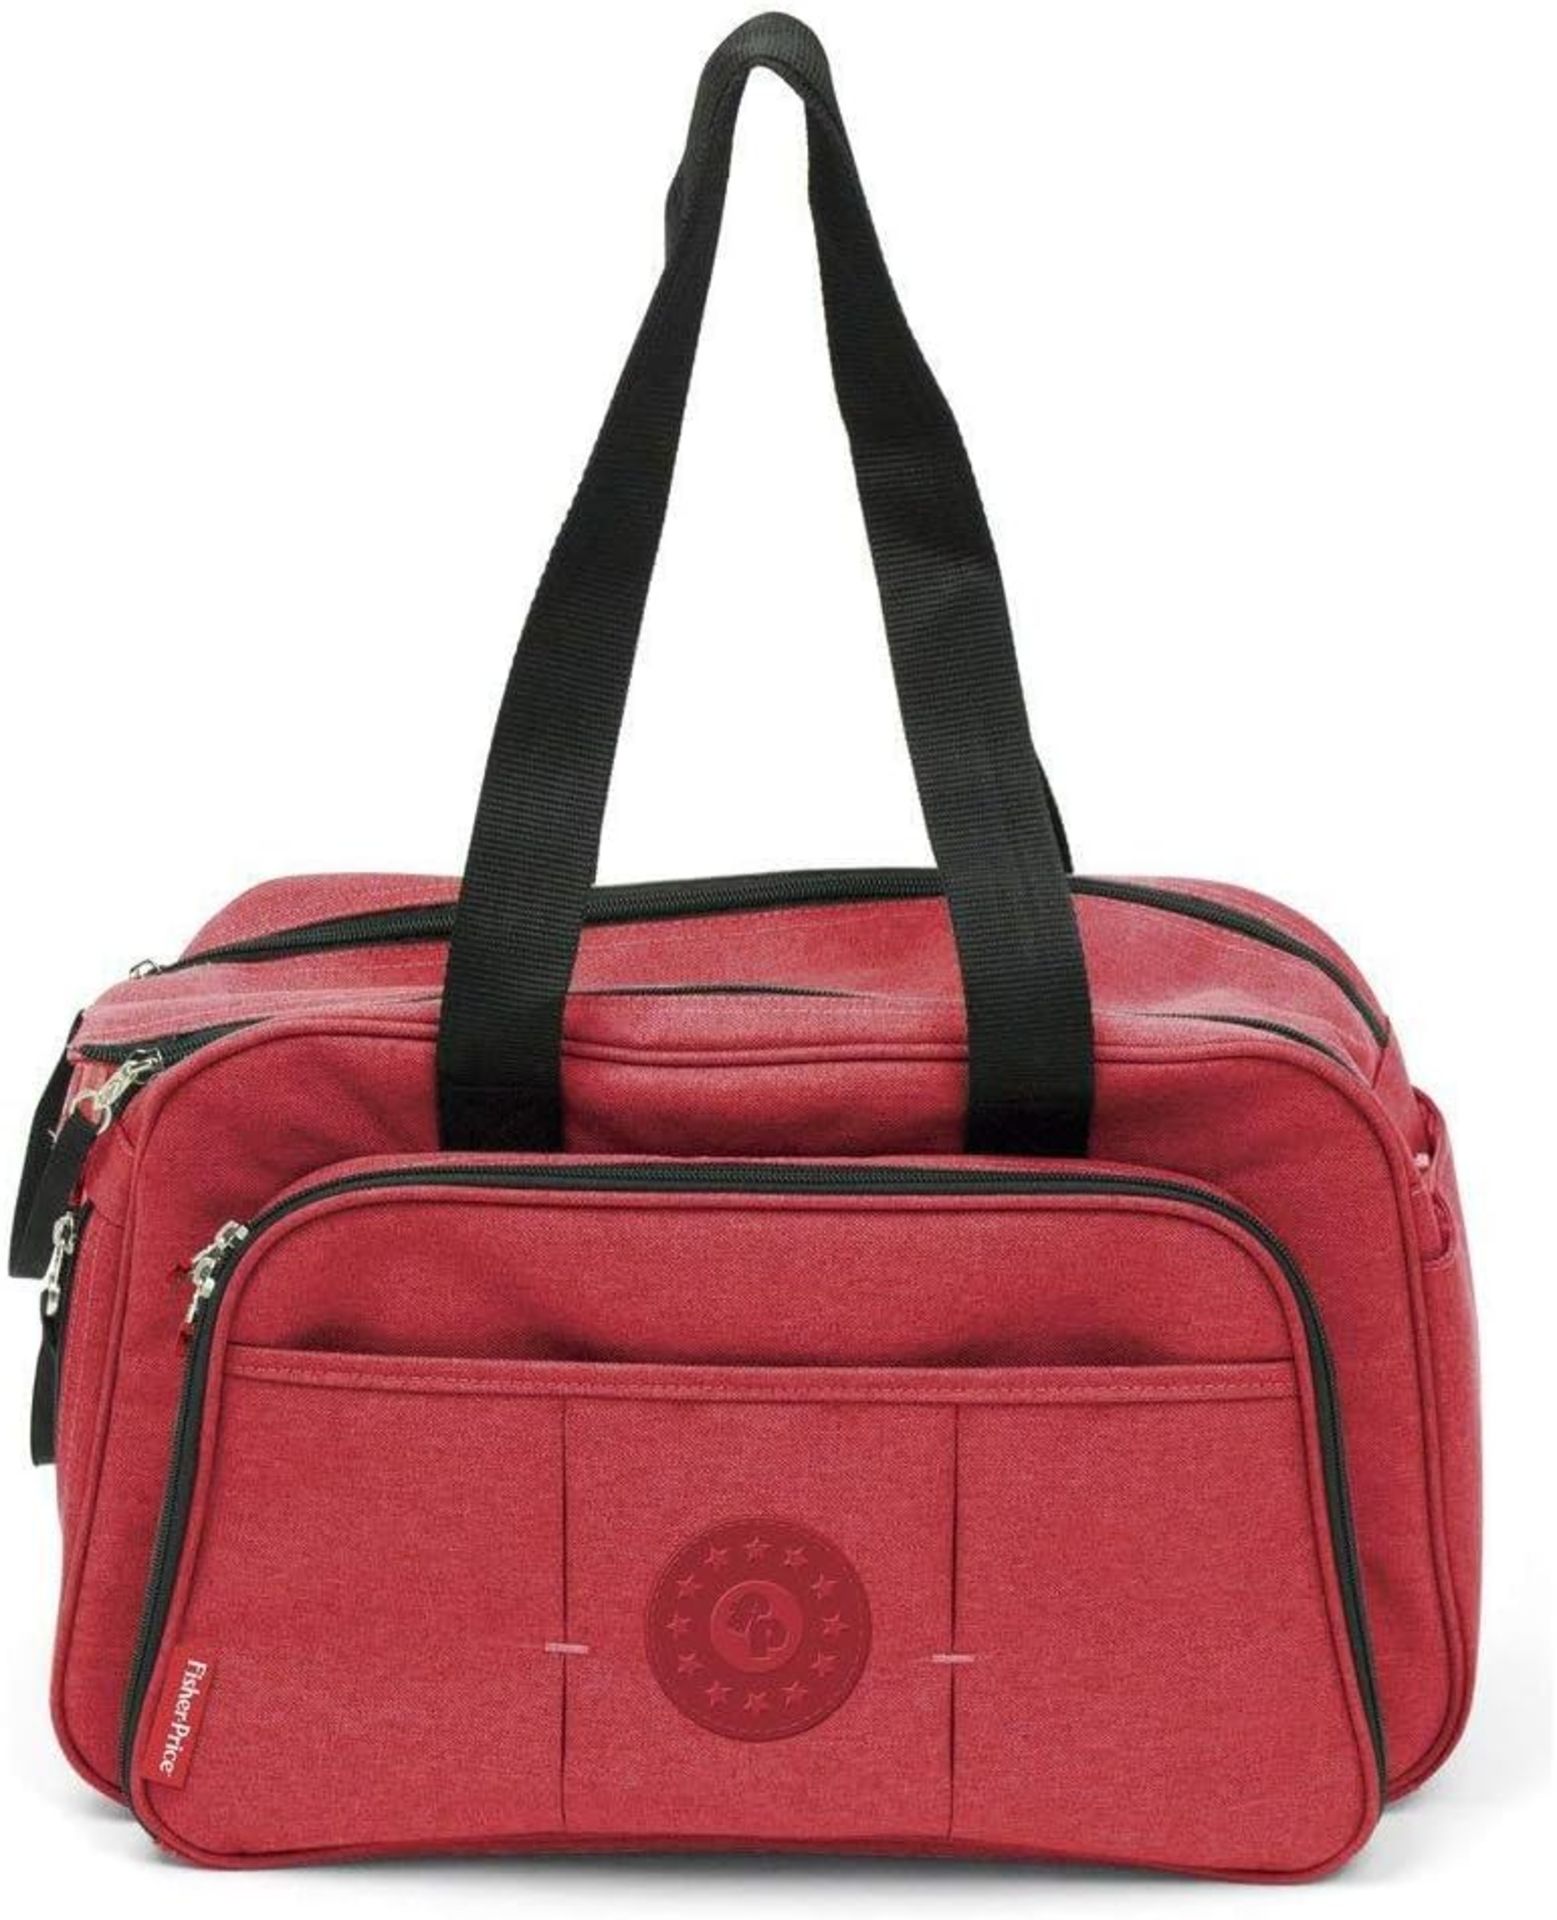 100 X NEW FP BABY BAG+ACC 46X15X18 RED